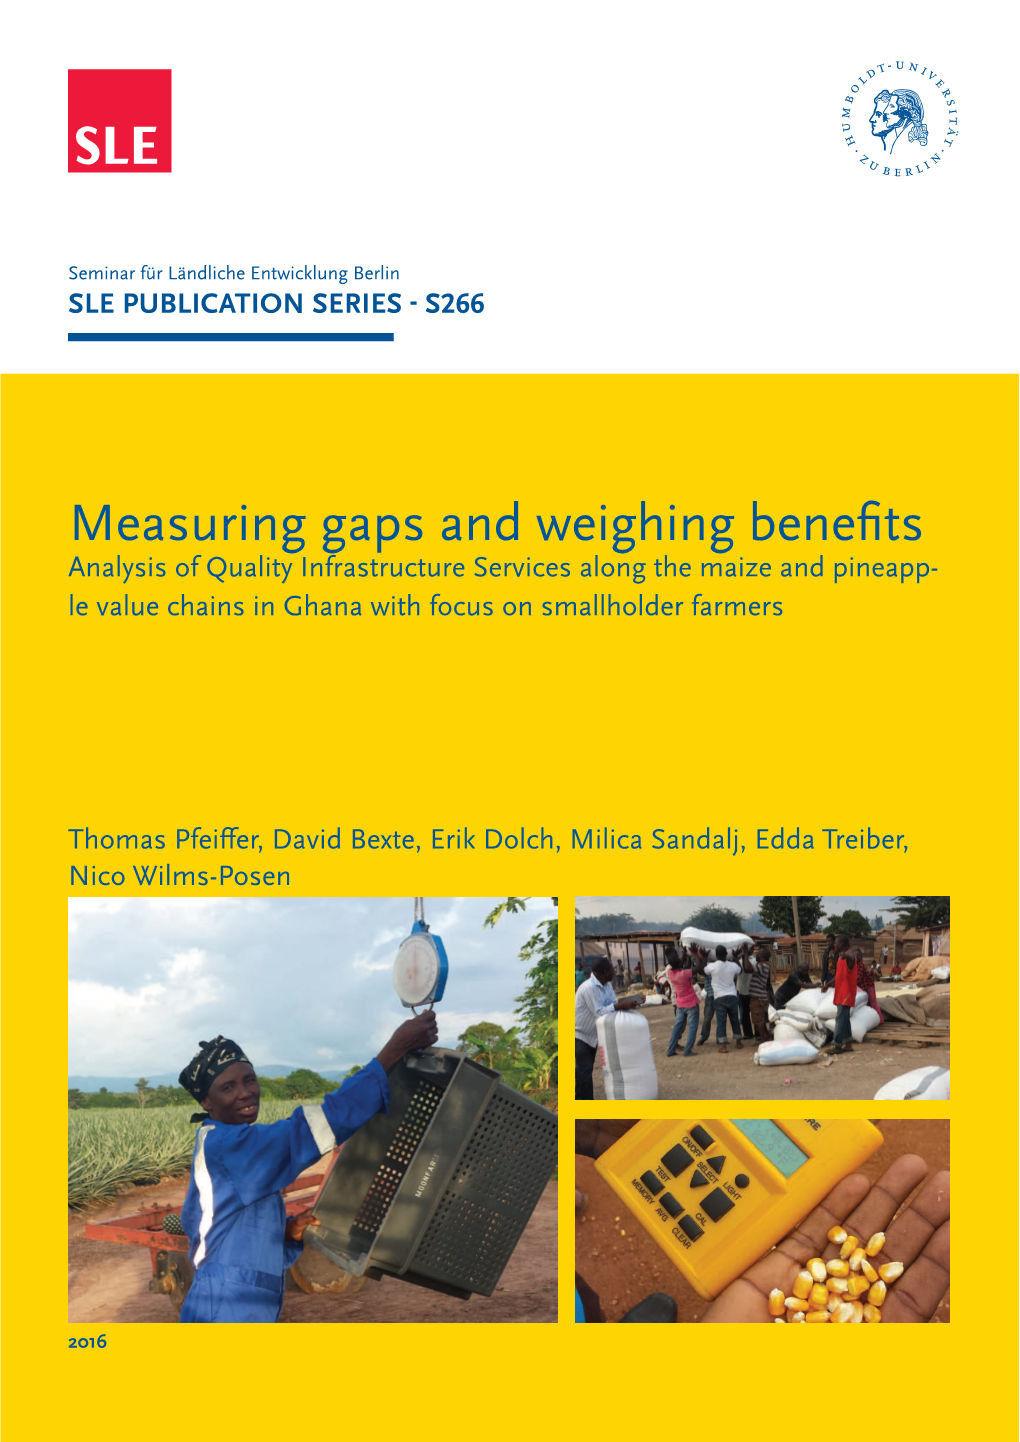 Measuring Gaps and Weighing Benefits (Ghana)